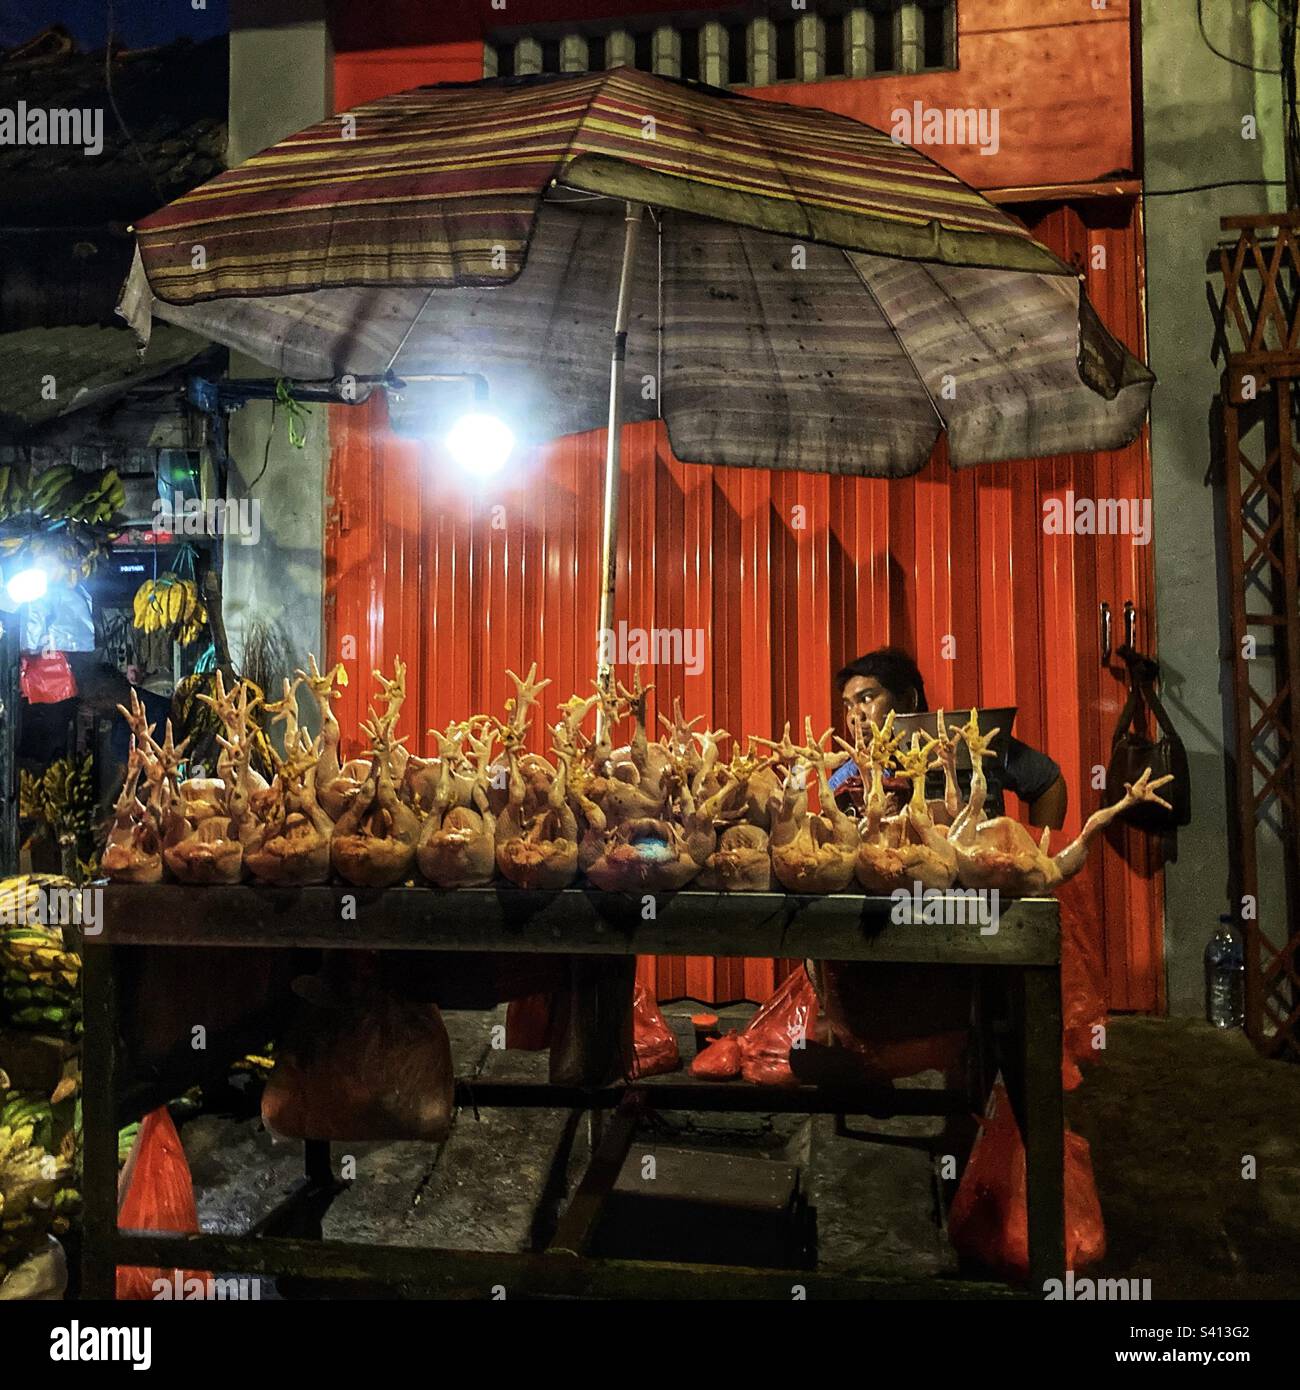 Dead chickens for sale at a night market stall in Surabaya Indonesia Stock Photo